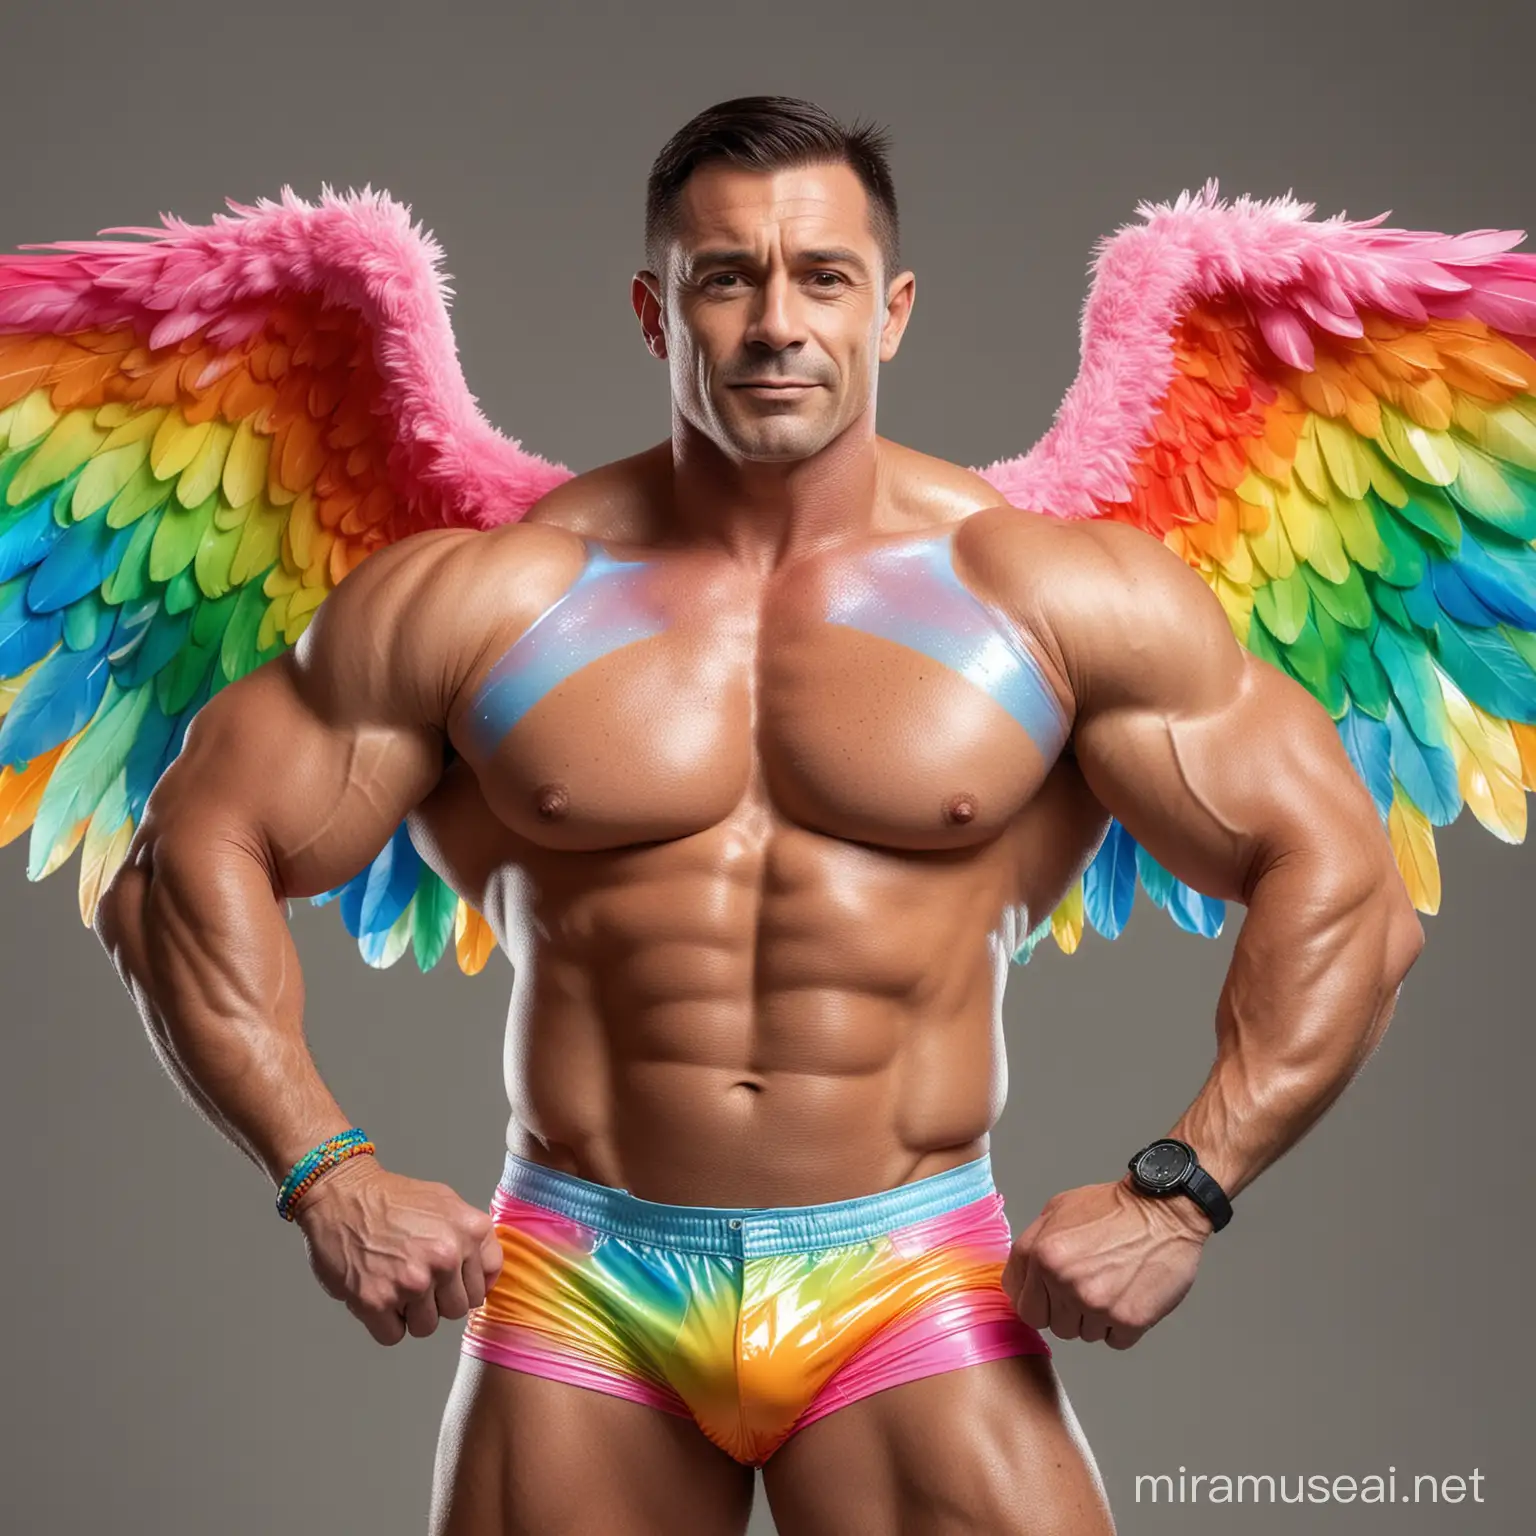 Ultra Beefy IFBB Bodybuilder Flexing in Rainbow Colored Eagle Wings Jacket with Doraemon